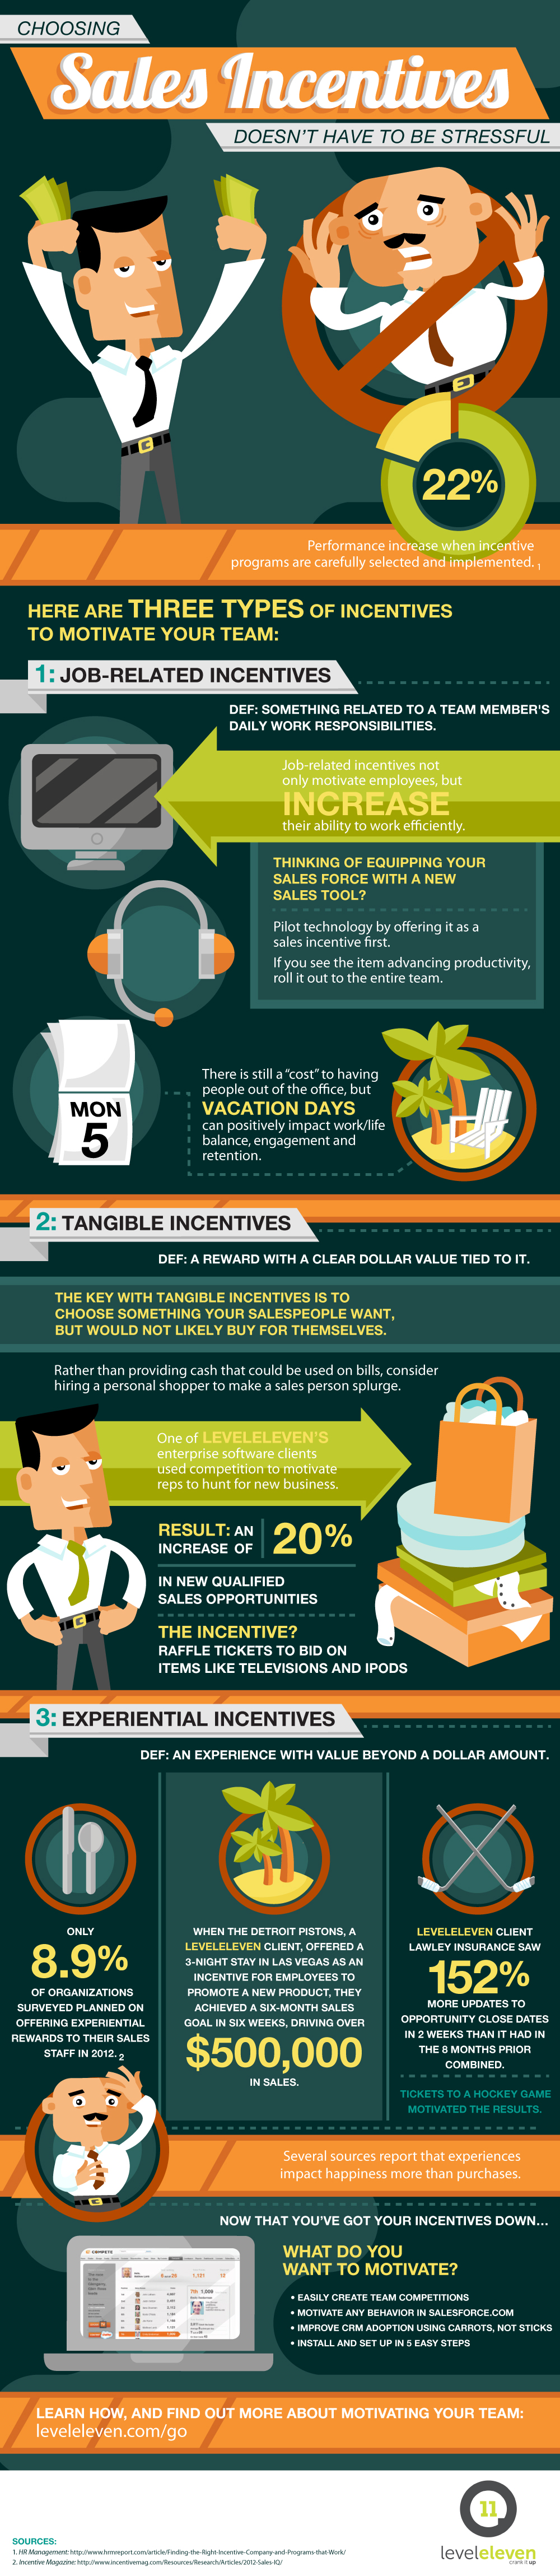 Sales Incentives Infographic